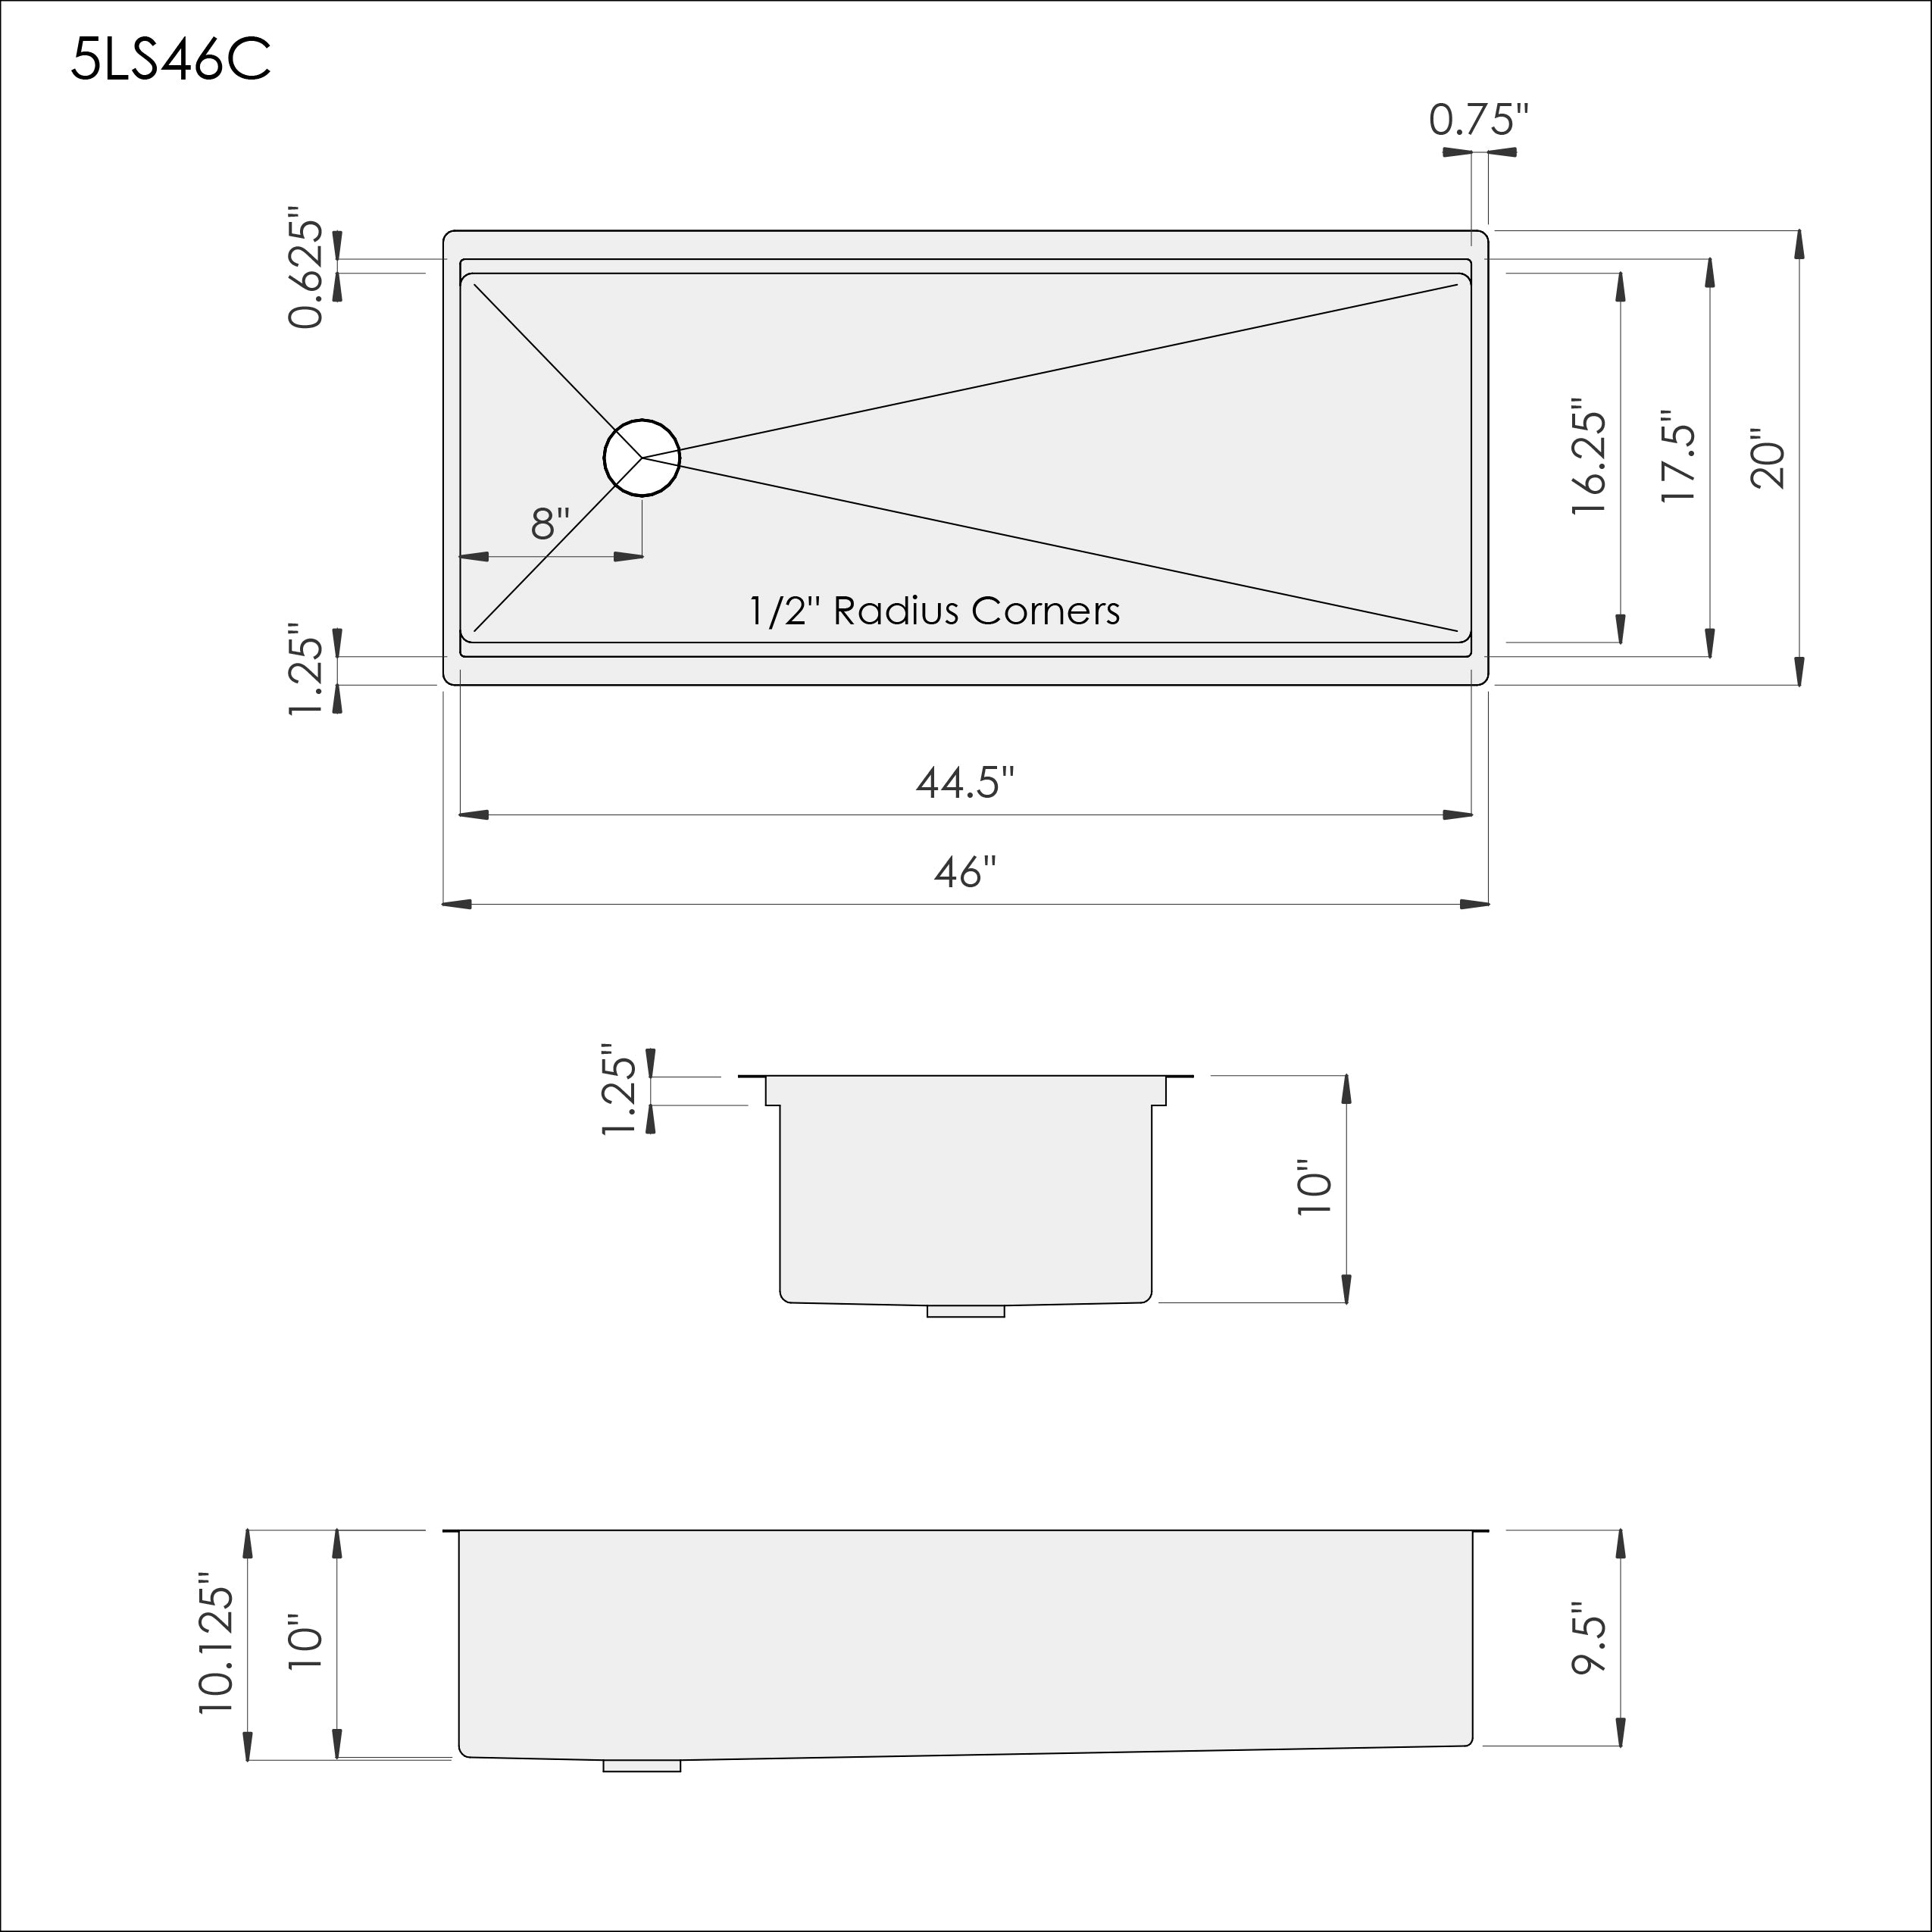 Dimensions of Create Good Sinks 46 inch undermount stainless steel workstation kitchen sink with offset, reversible drain. Double ledge option for dual tier functionality.